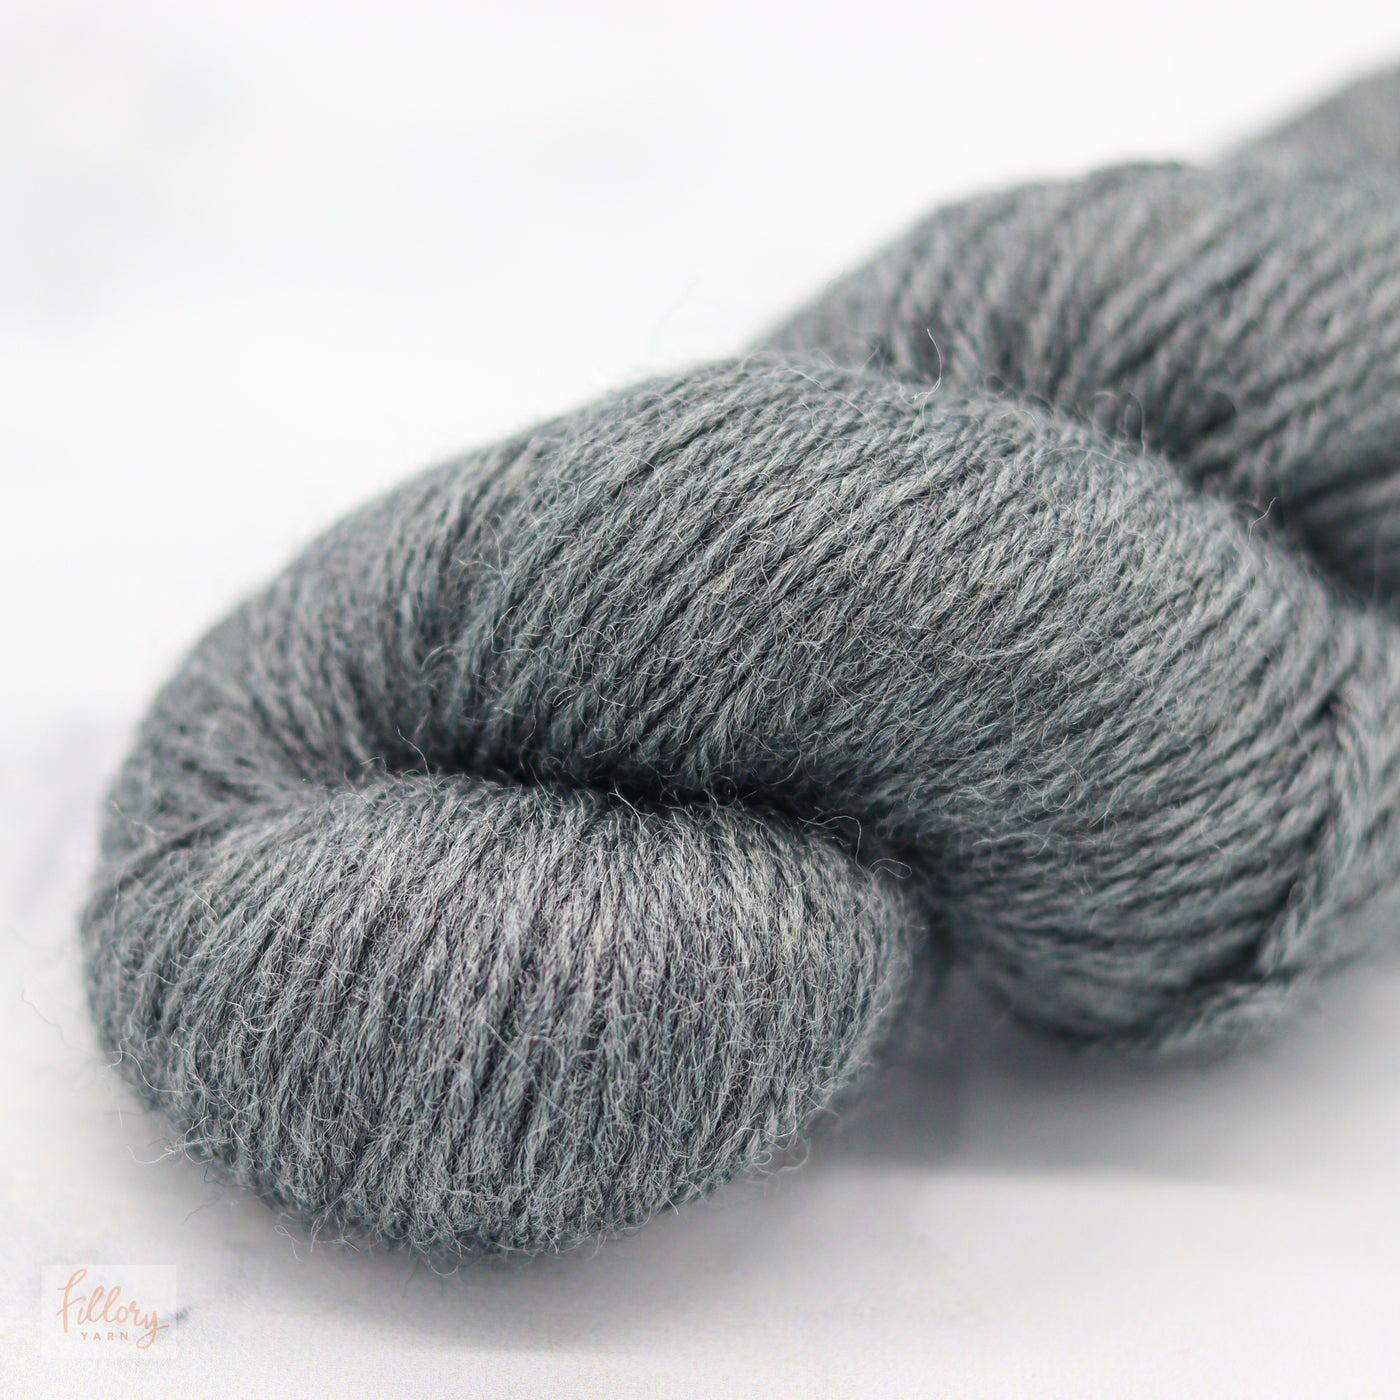 West Yorkshire Spinners Fleece Bluefaced Leicester DK Wool Knitting Yarn